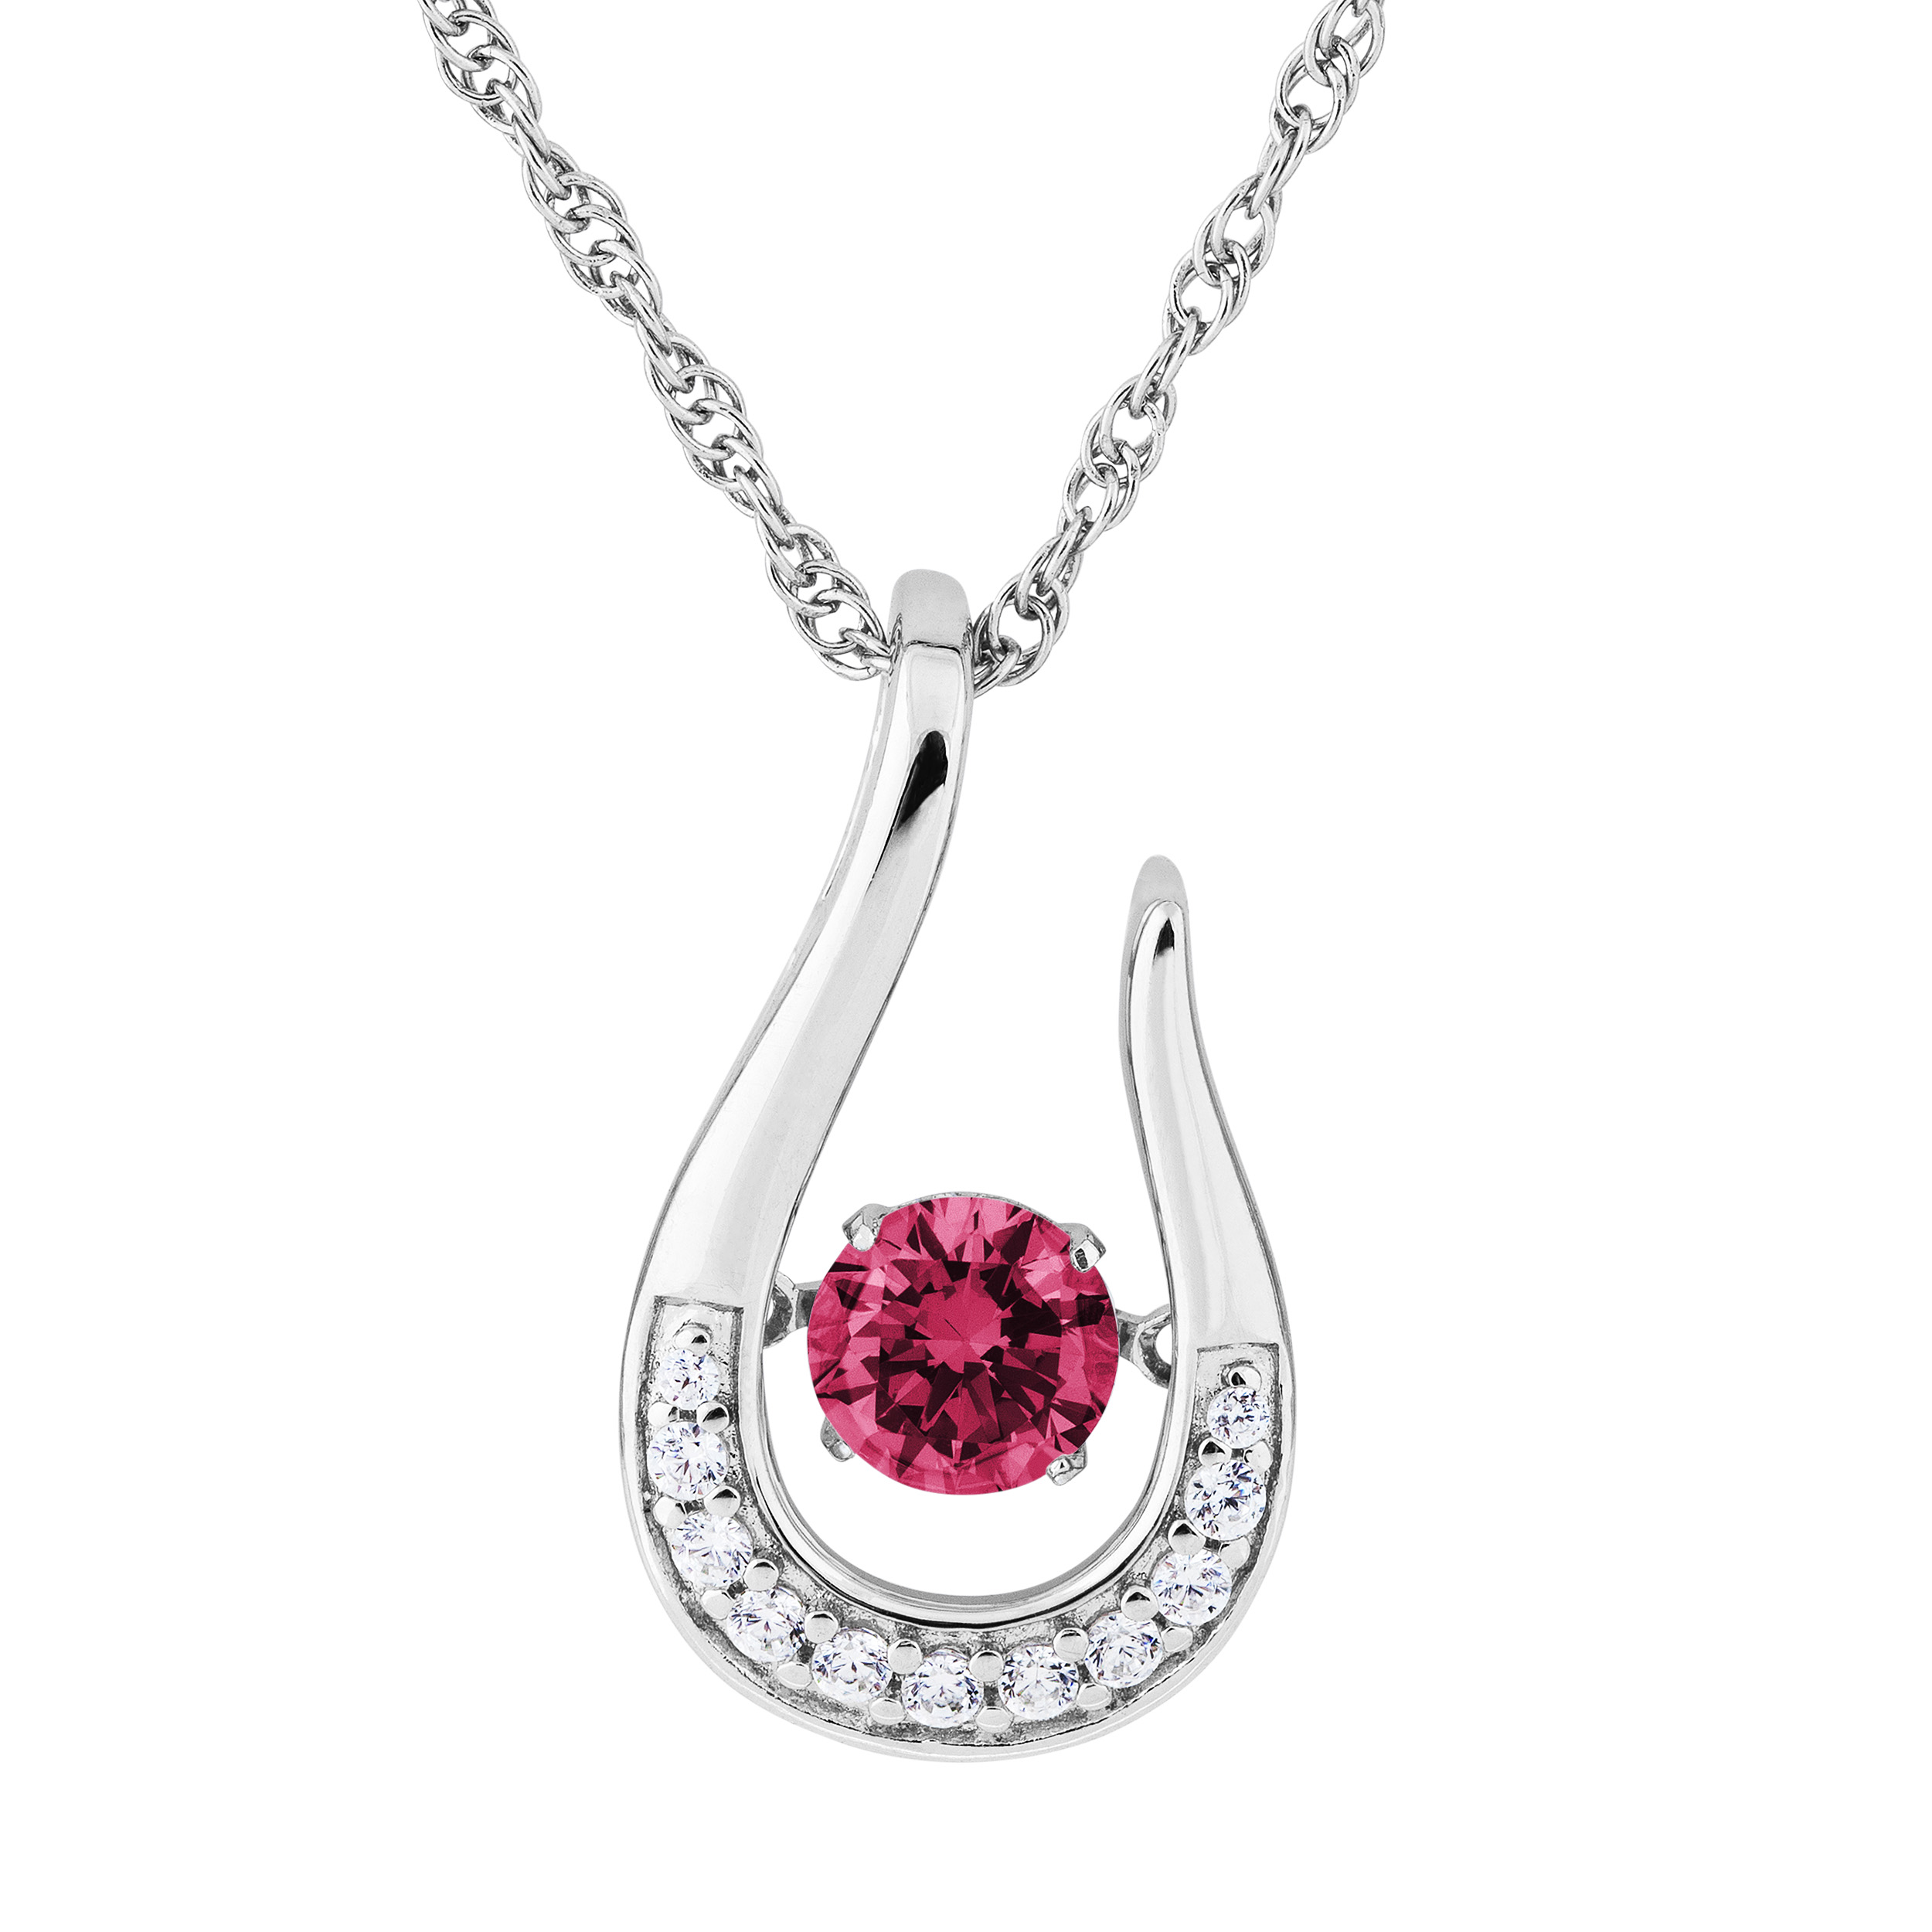 Ruby CZ with Cubic Zirconia July Teardrop Pendant Necklace, Rhodium Plated Sterling Silver